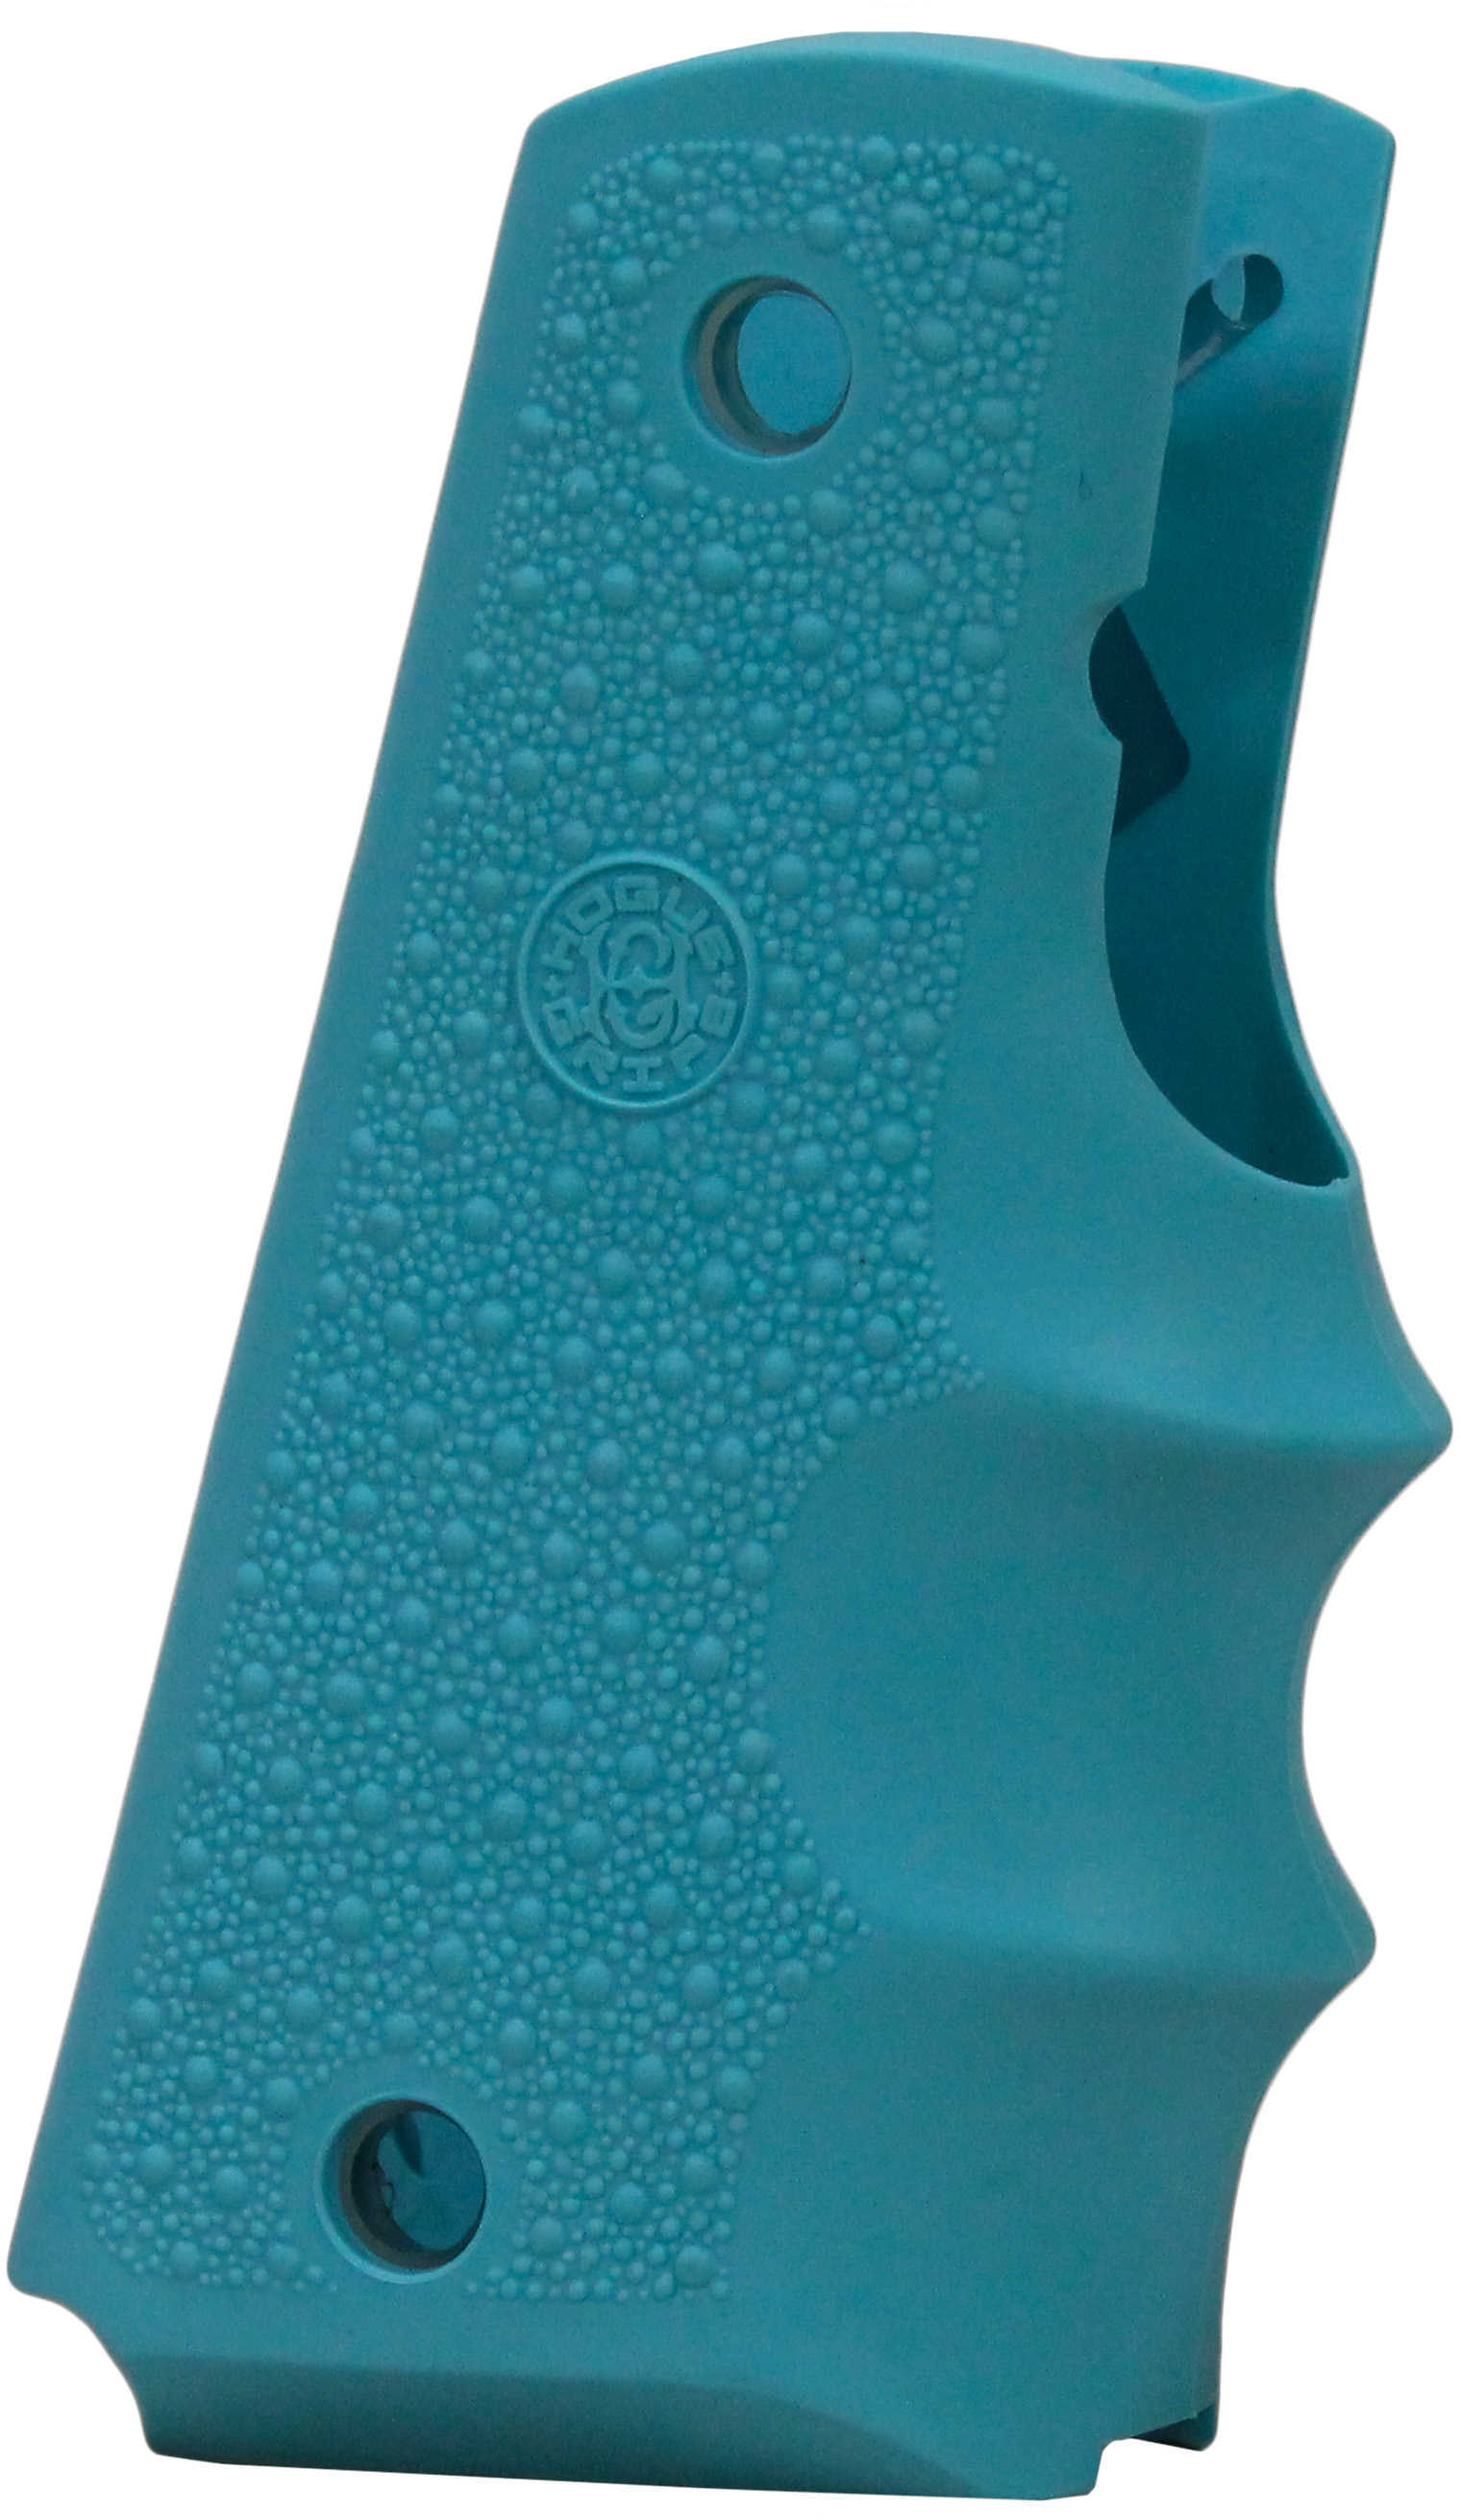 Hogue Colt Government Rubber Grip with Finger Grooves, Aqua Md: 45004